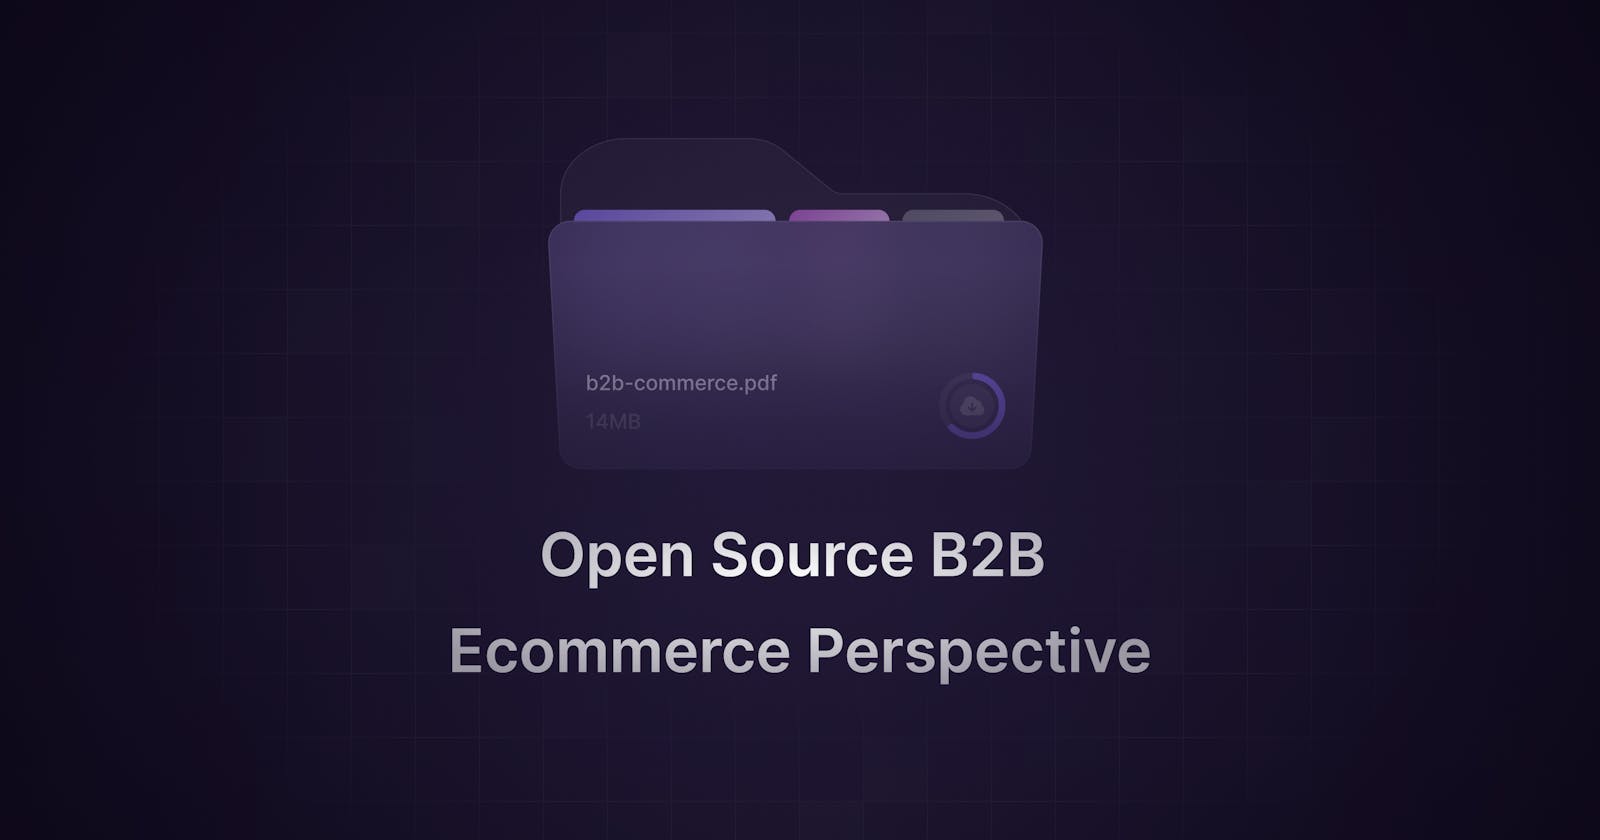 A Perspective on Open Source B2B Commerce